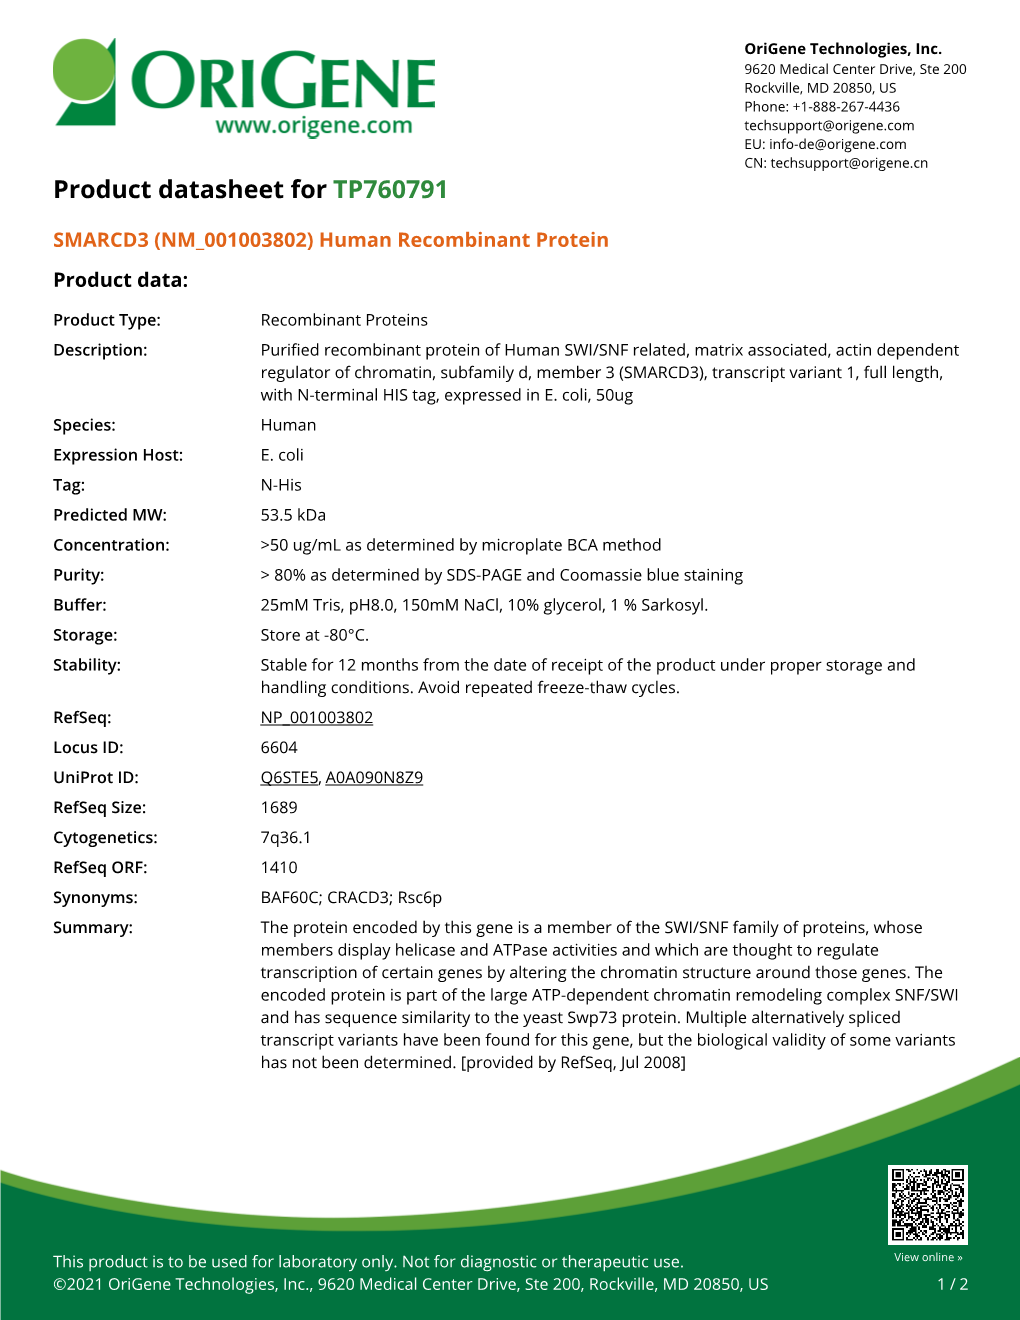 SMARCD3 (NM 001003802) Human Recombinant Protein – TP760791